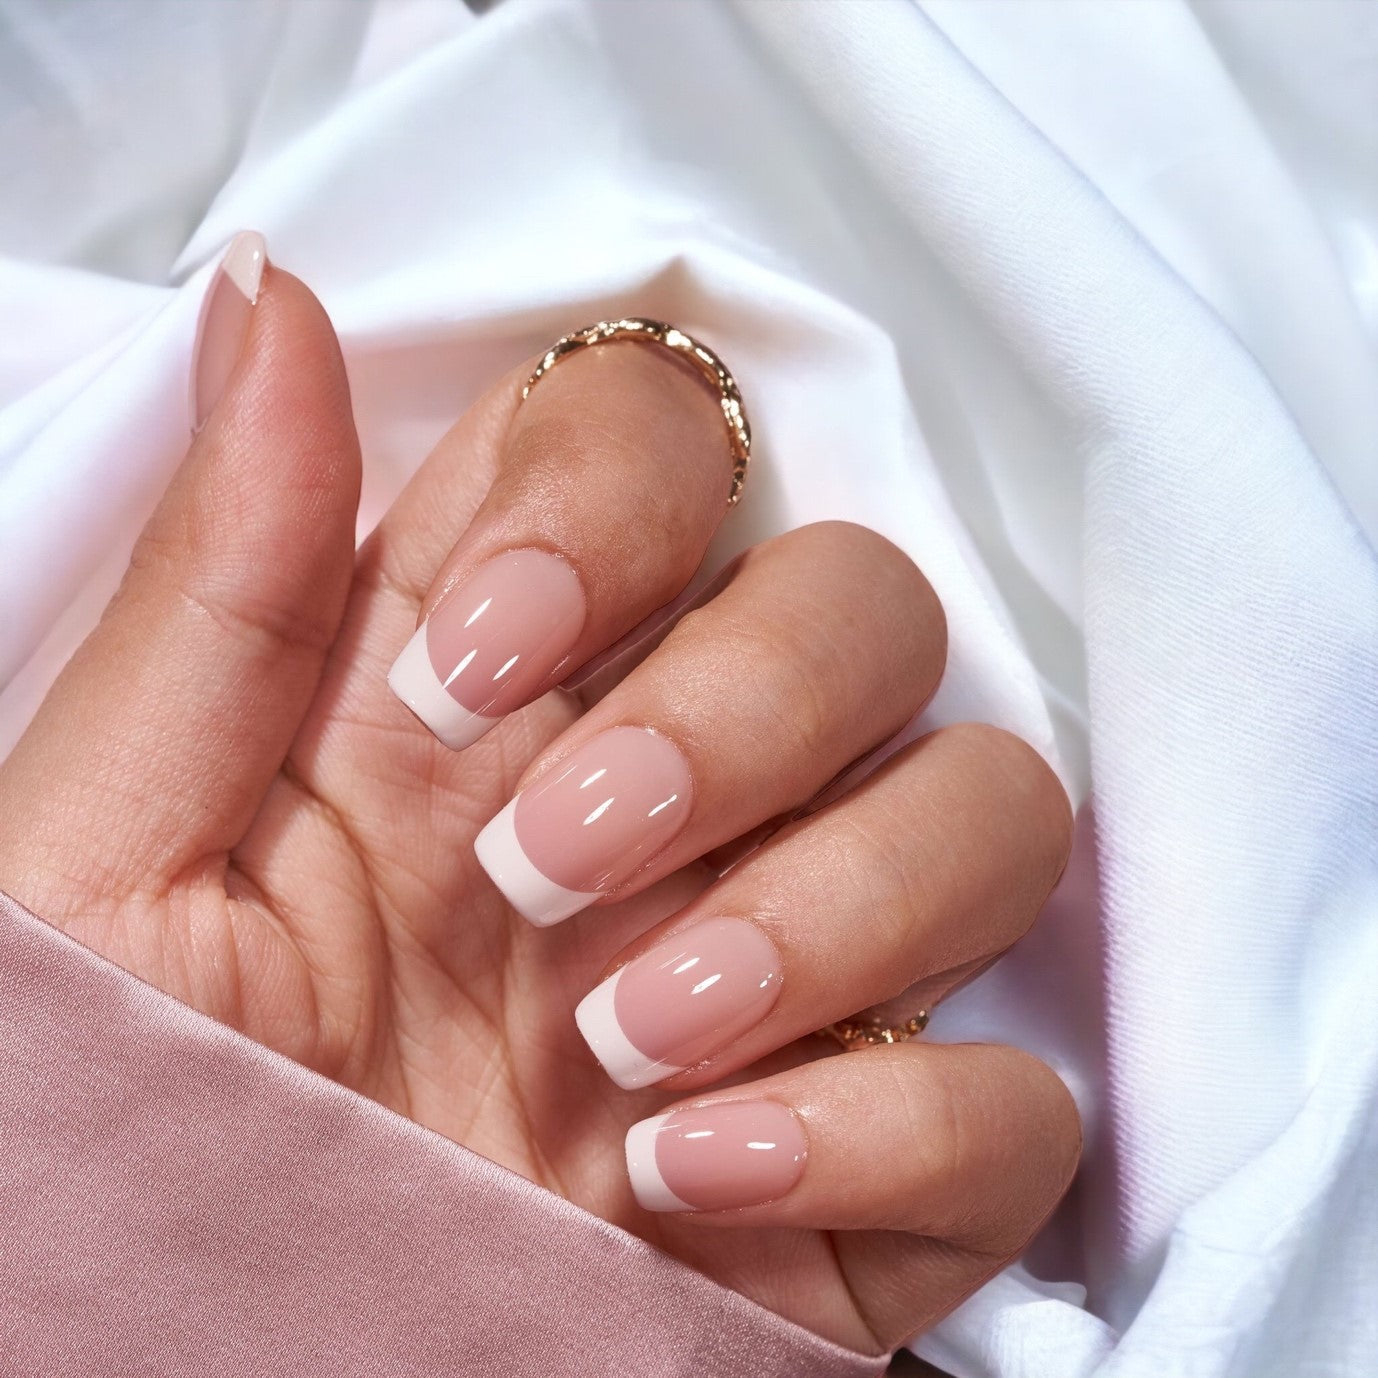 How to Find the Best Nail Shape for your Hands - Blog | OPI